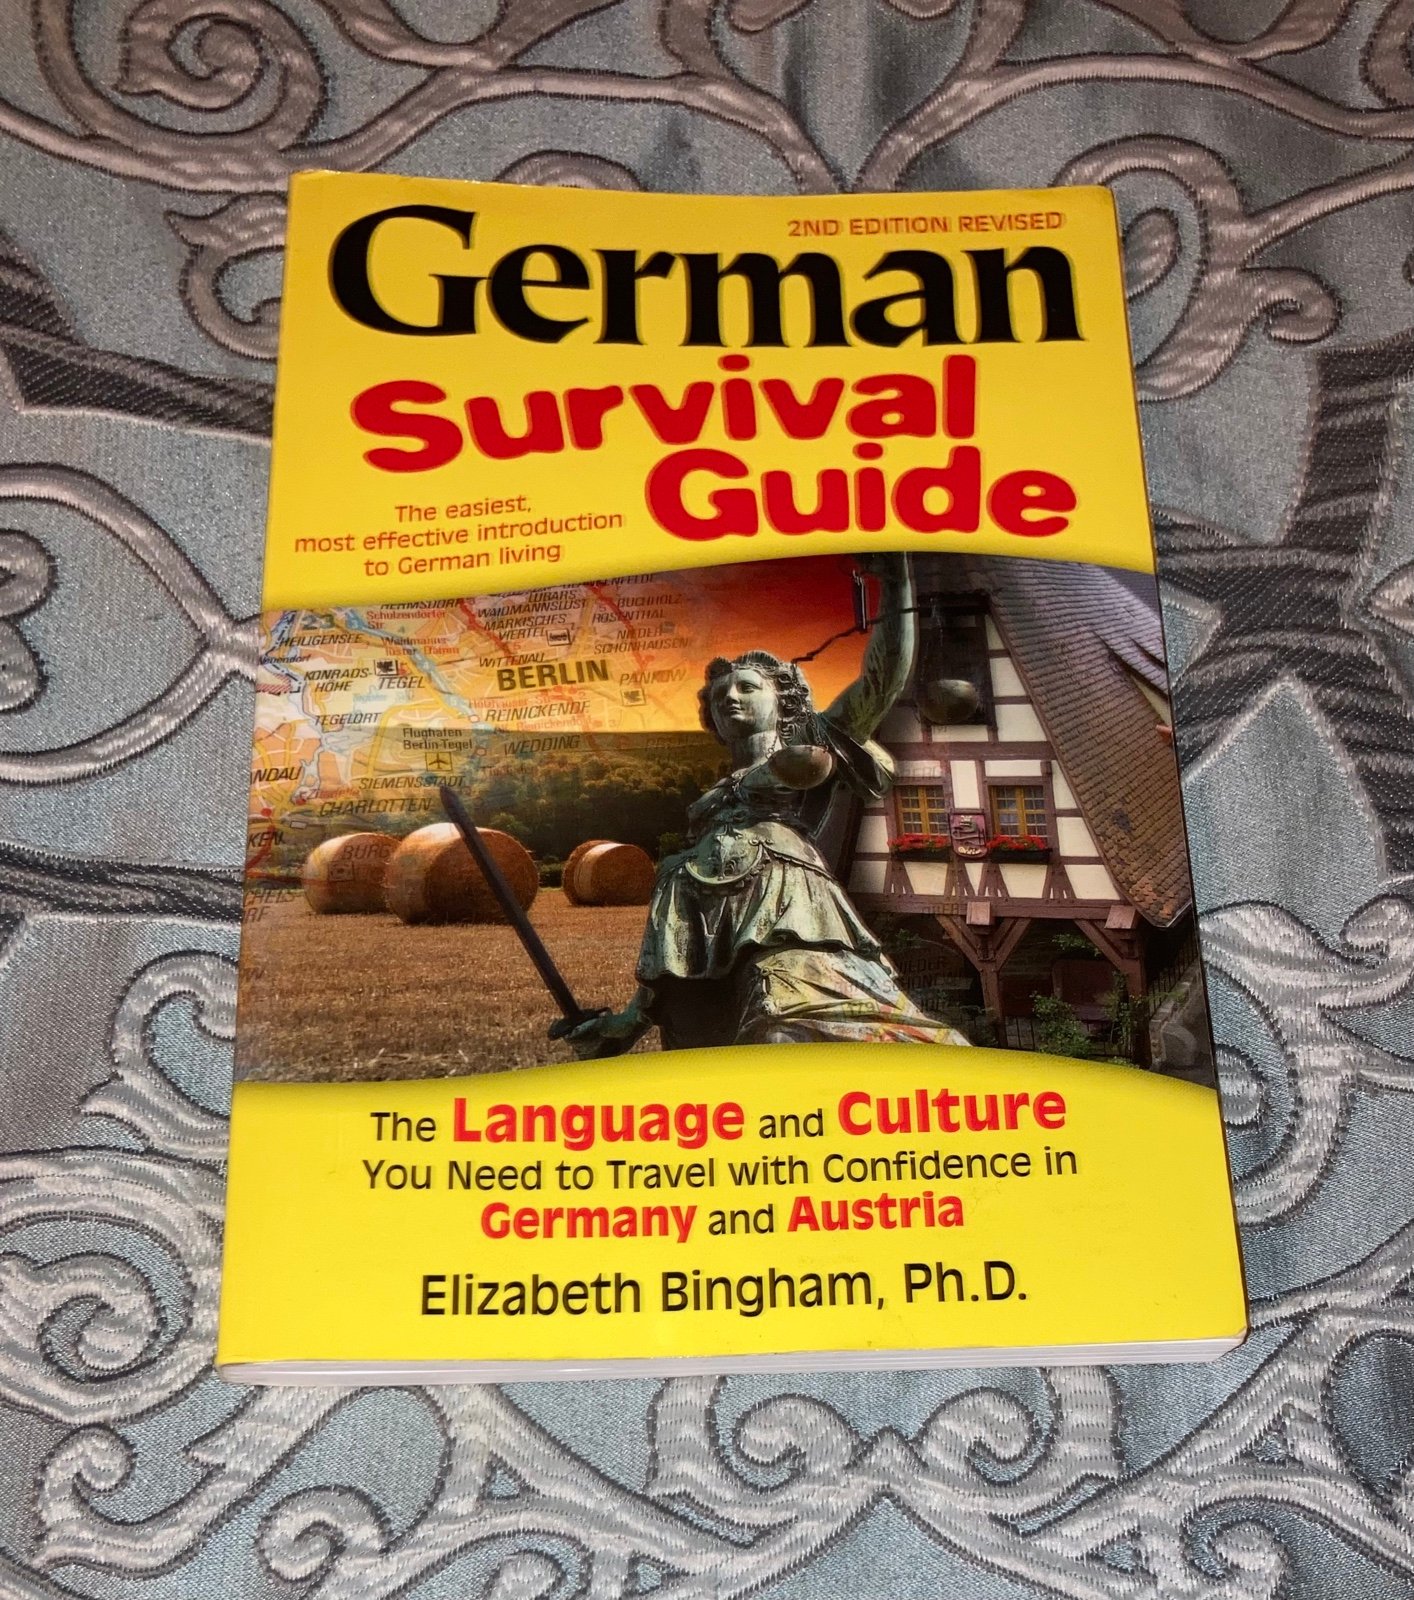 German Survival Guide 2nd edition revised book 